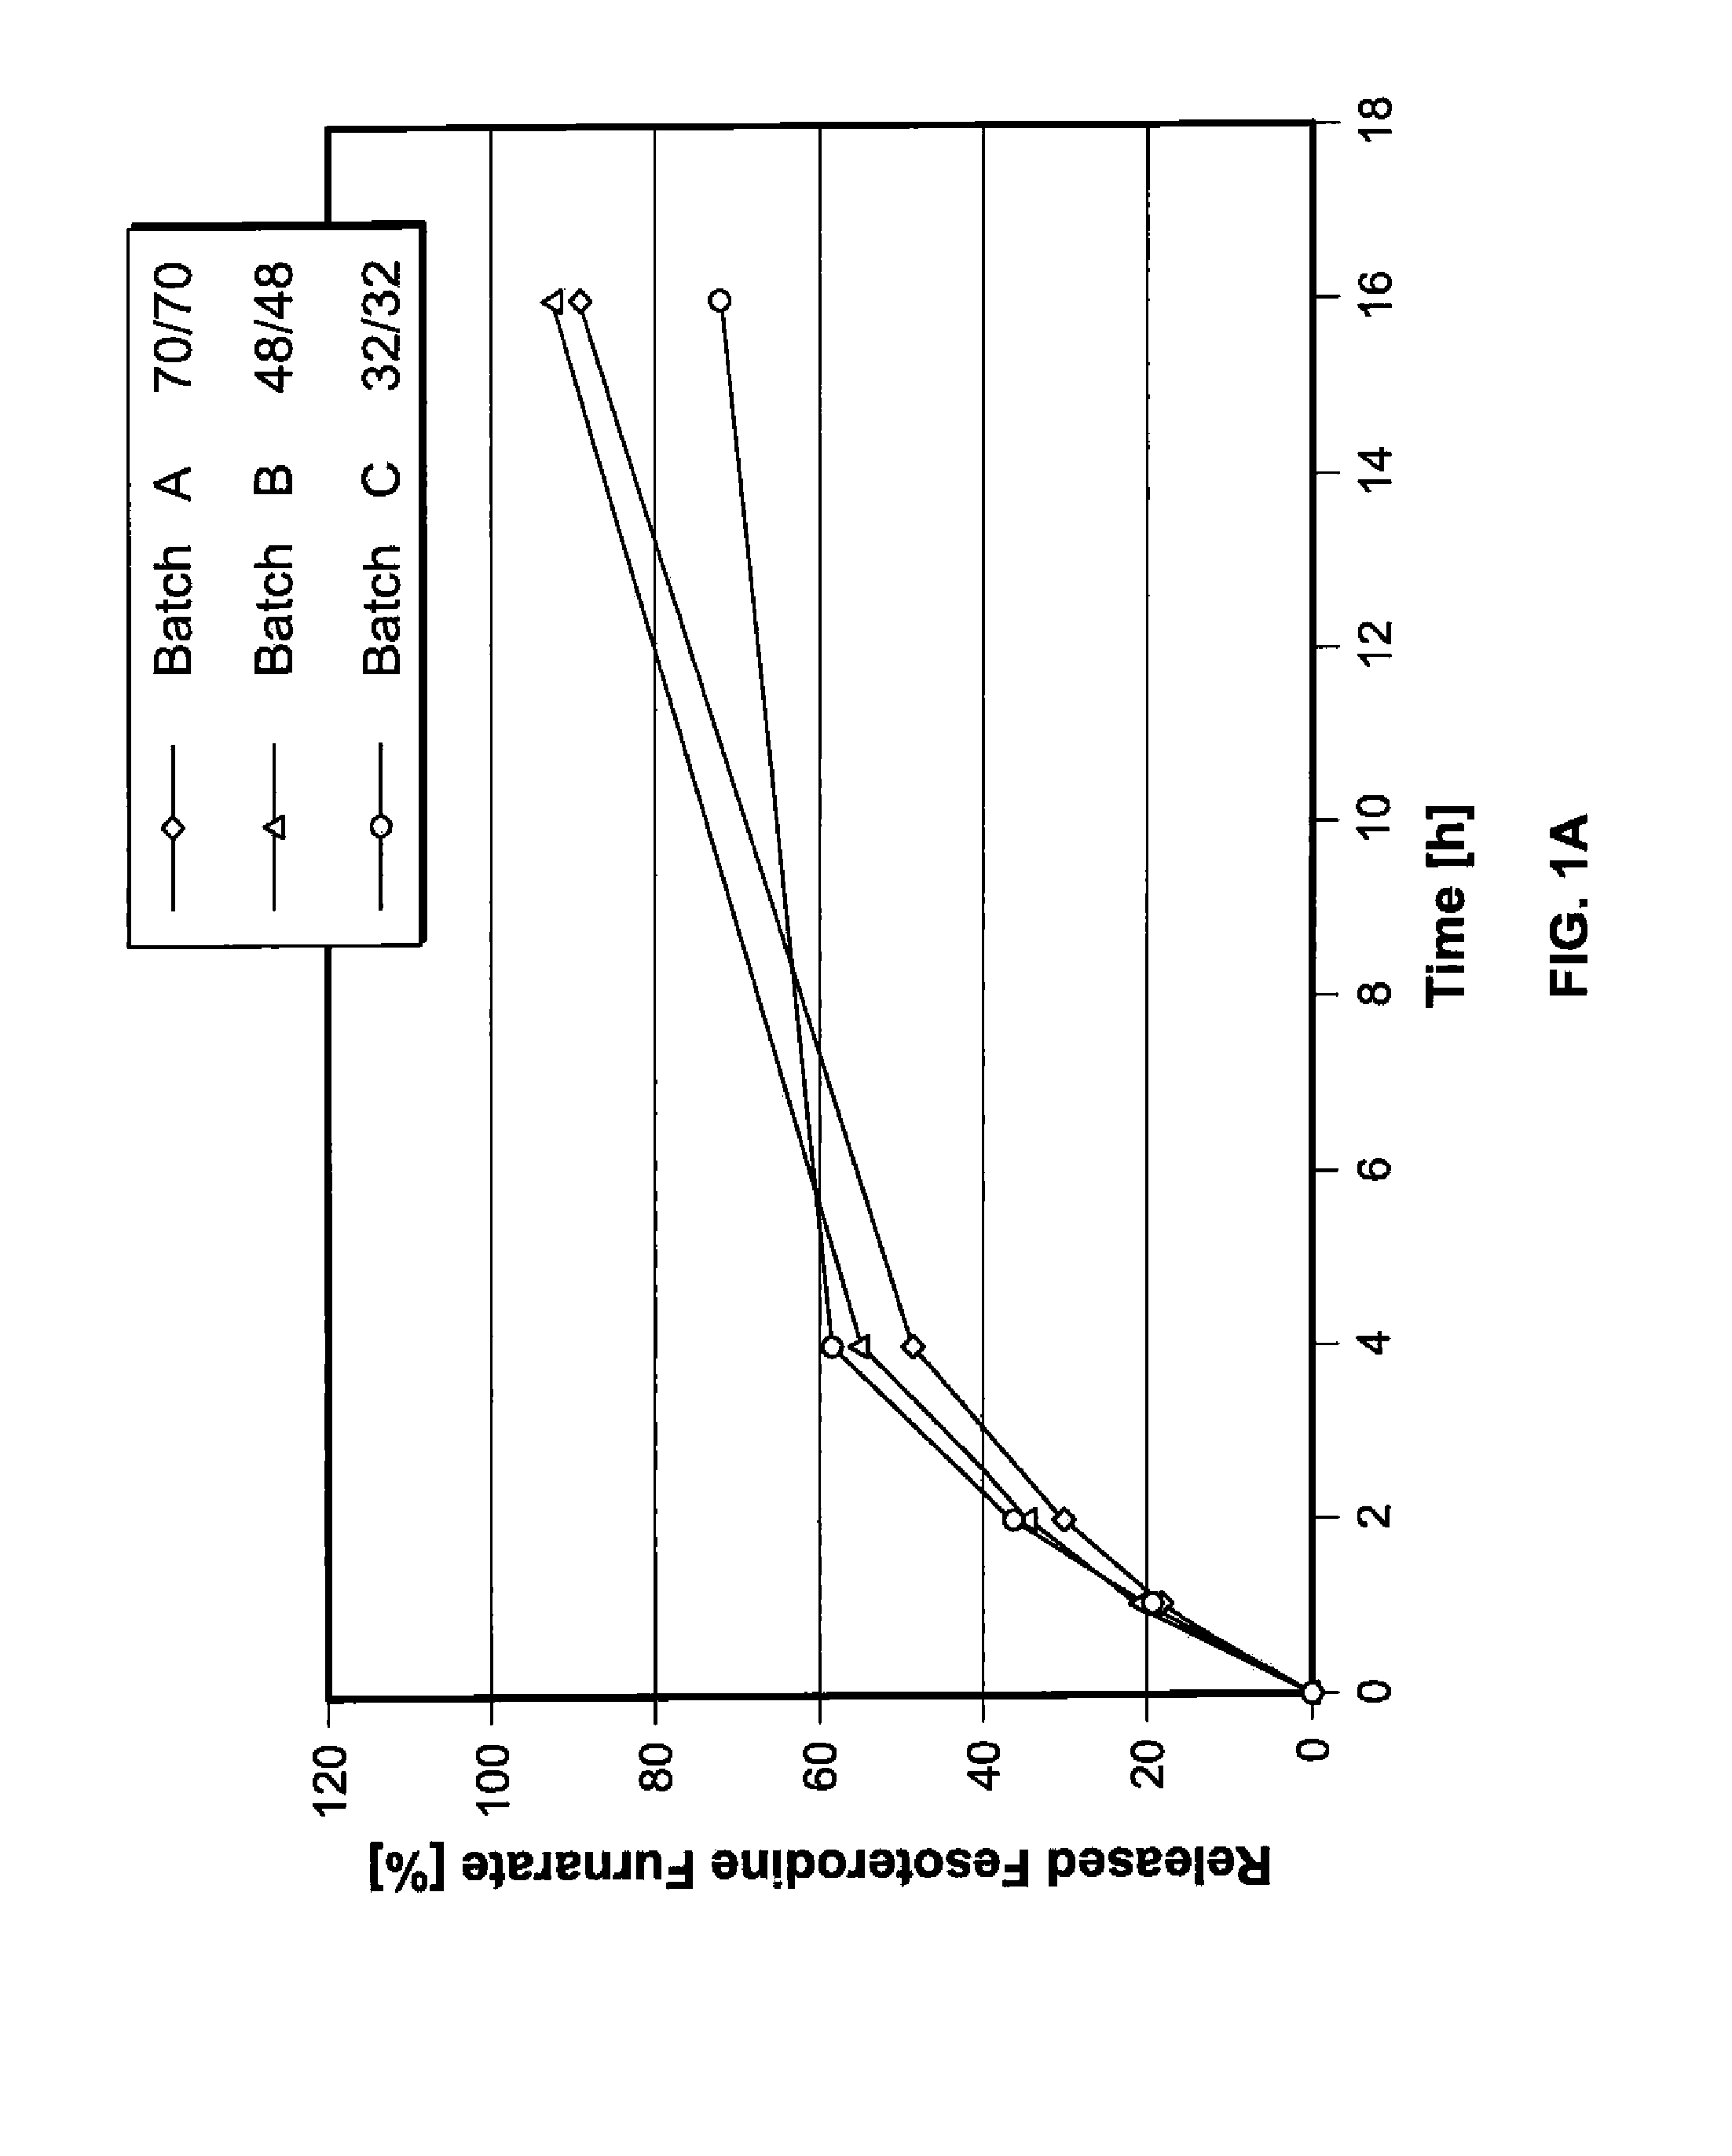 Pharmaceutical compositions comprising fesoterodine